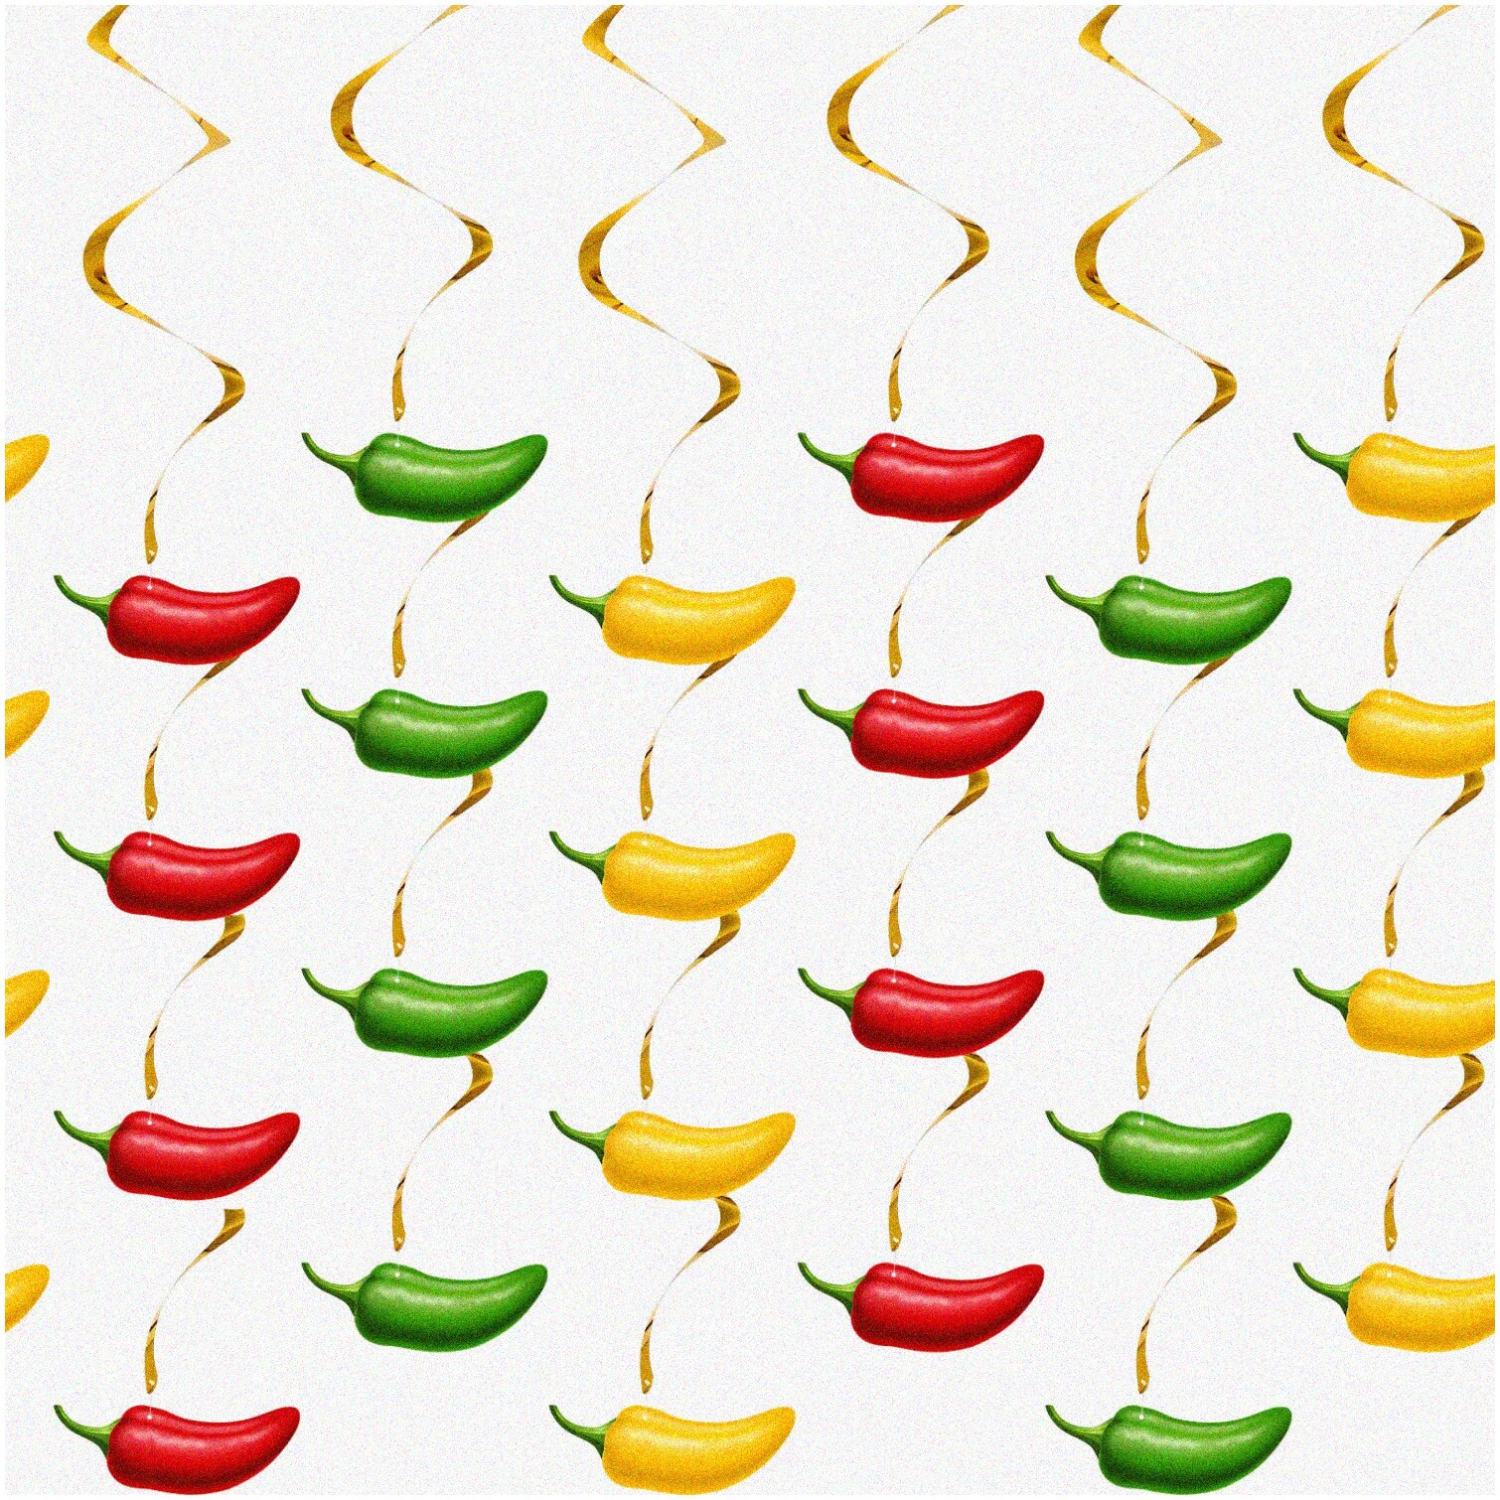 Spicy Fiesta Whirls - Vibrant Chili Pepper Decorations for Cinco de Mayo & Mexican Party - Spiral Hanging Streamers in Red, Yellow, Green - 30 Pieces